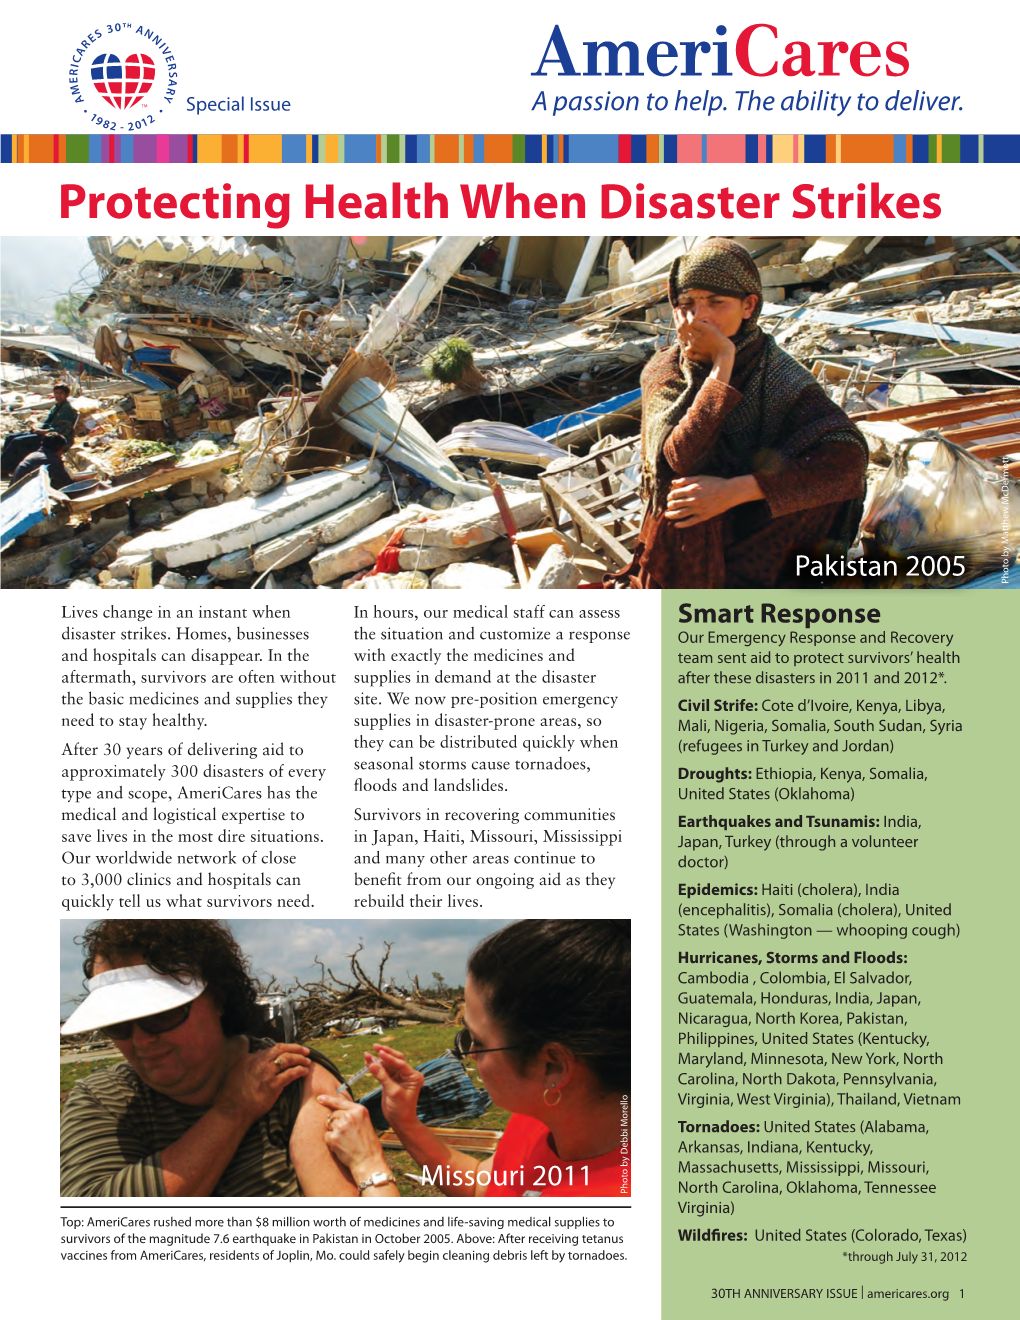 Protecting Health When Disaster Strikes